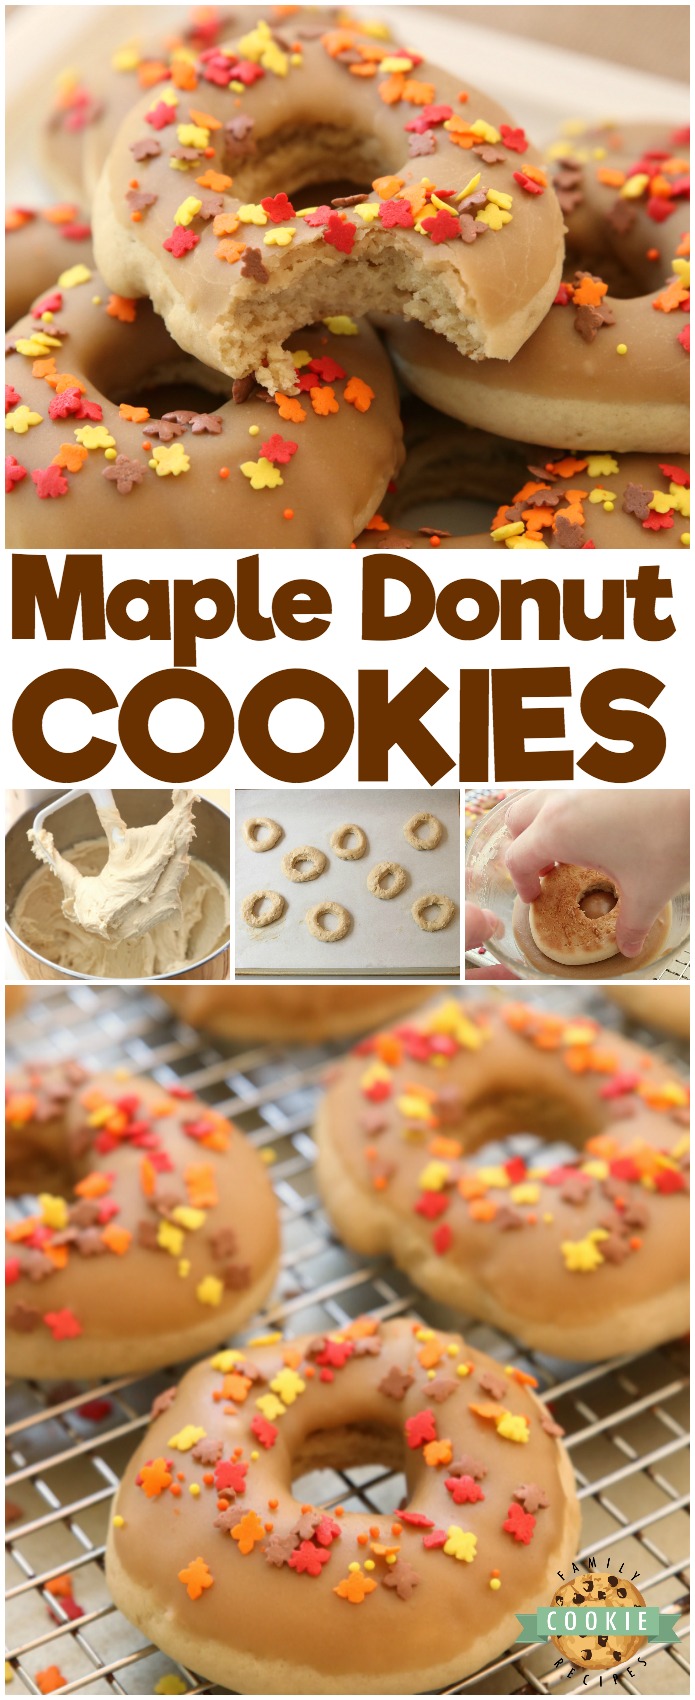 Maple Donut Cookies are soft & pillowy donut-shaped cookies with a lovely maple glaze topping. Everything you love about maple donuts, only in cookie form! #maple #donut #cookies #baking #Fall #frosting #sprinkles #recipe from FAMILY COOKIE RECIPES 